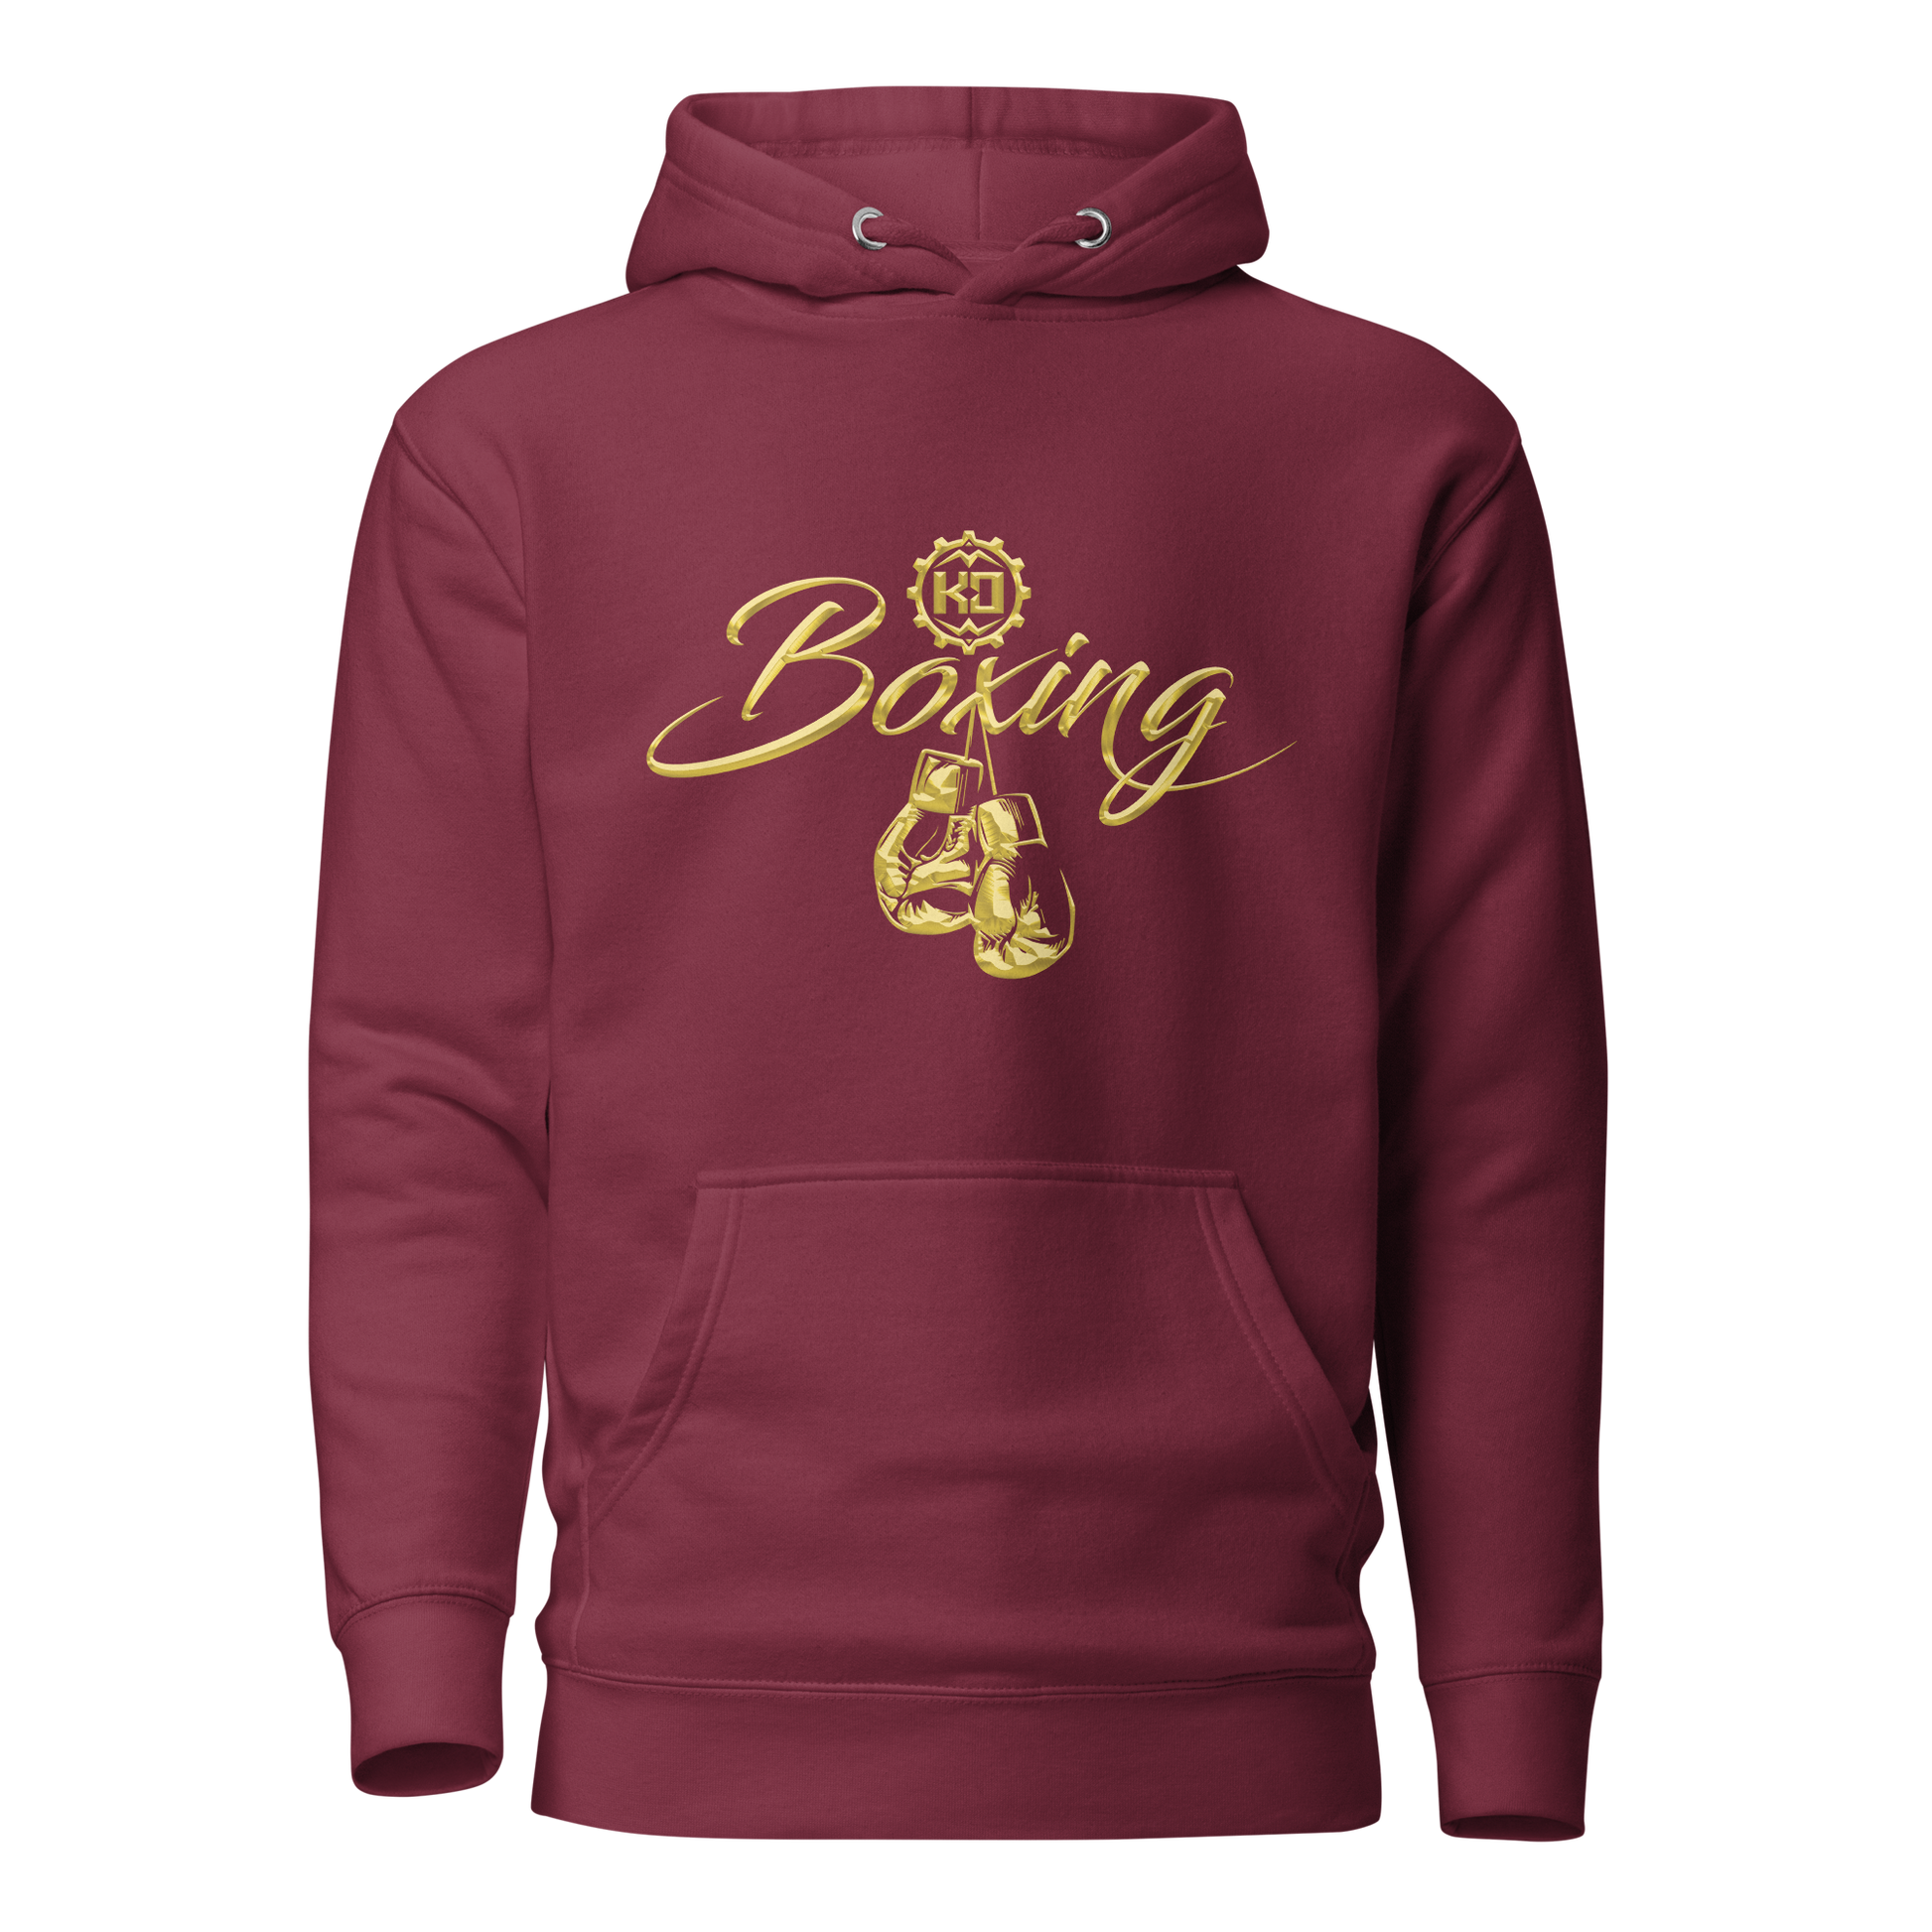 Cotton Hoodie Ko Machine Boxing Fight Club front maroon